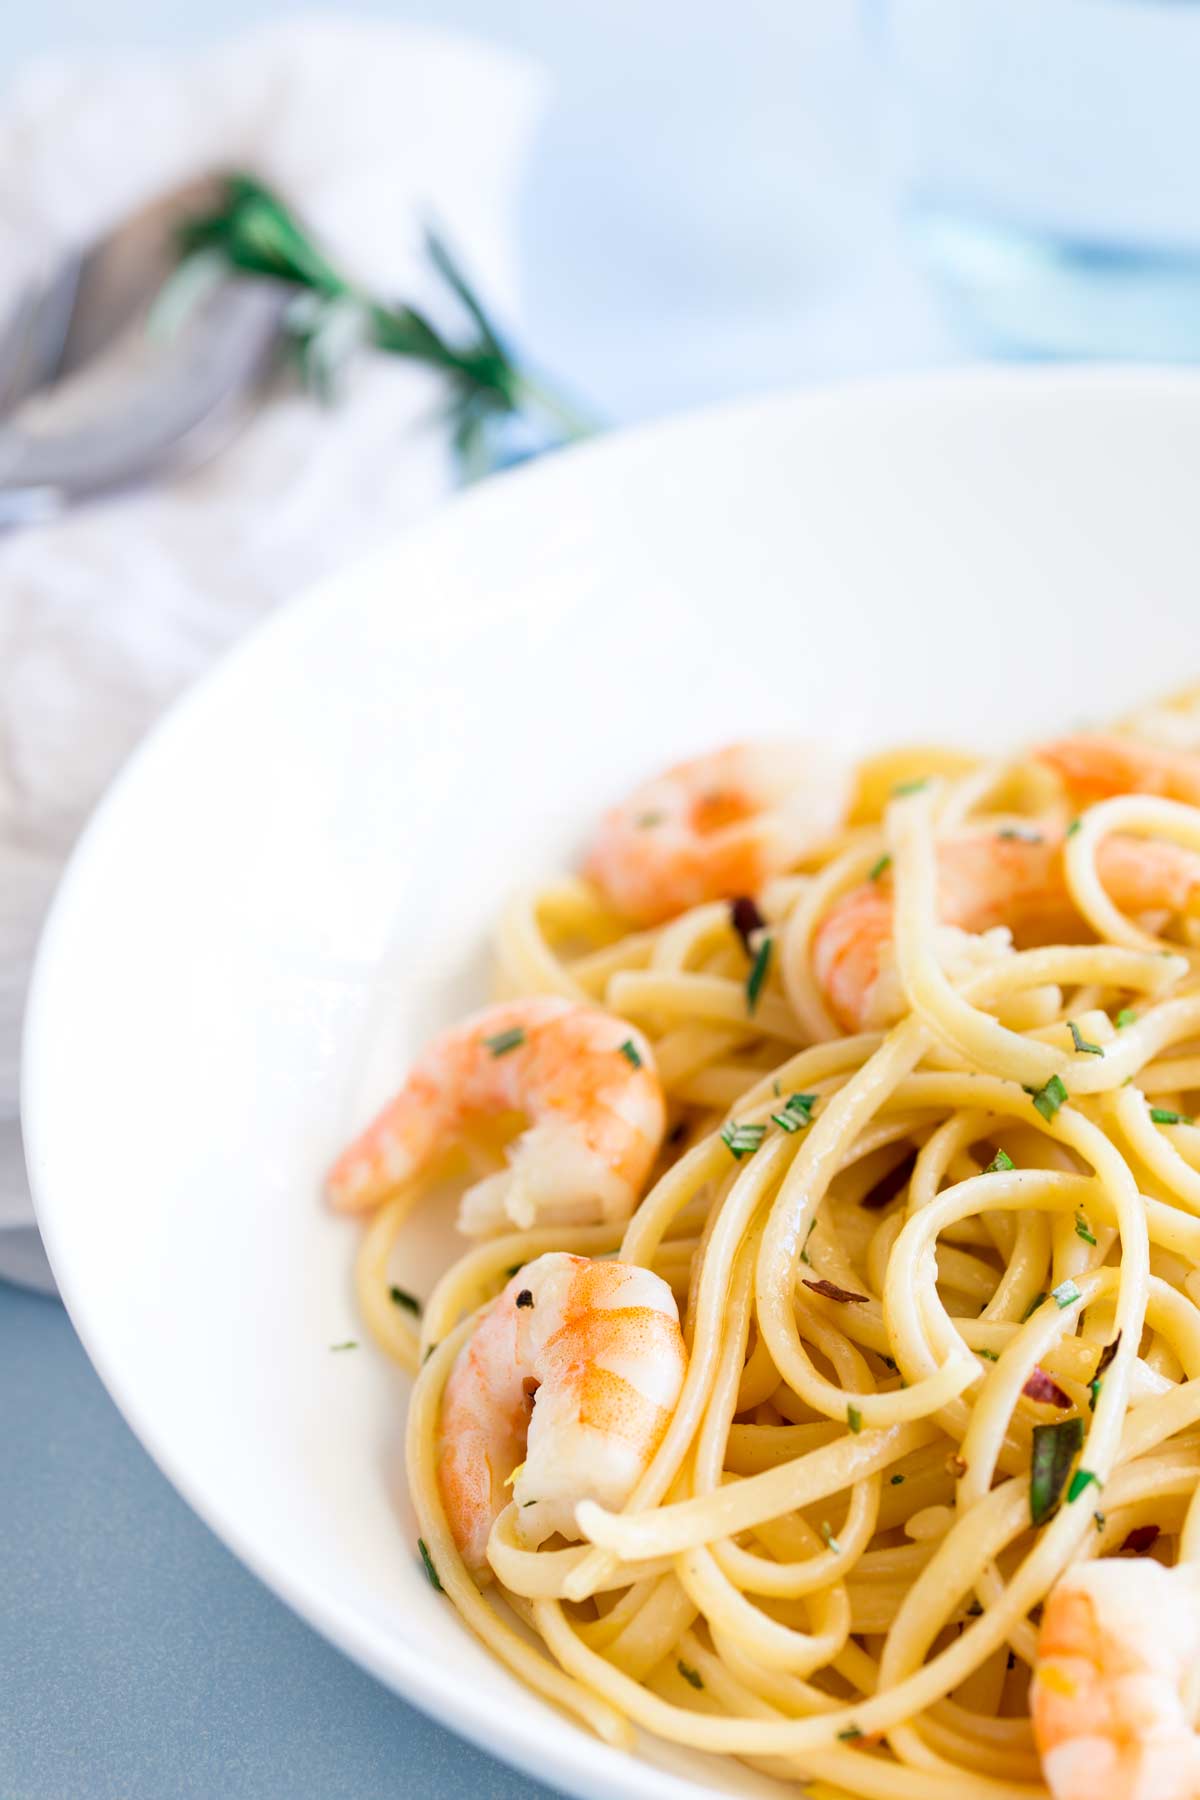 shrimp pasta in a white bowl with rosemary behind